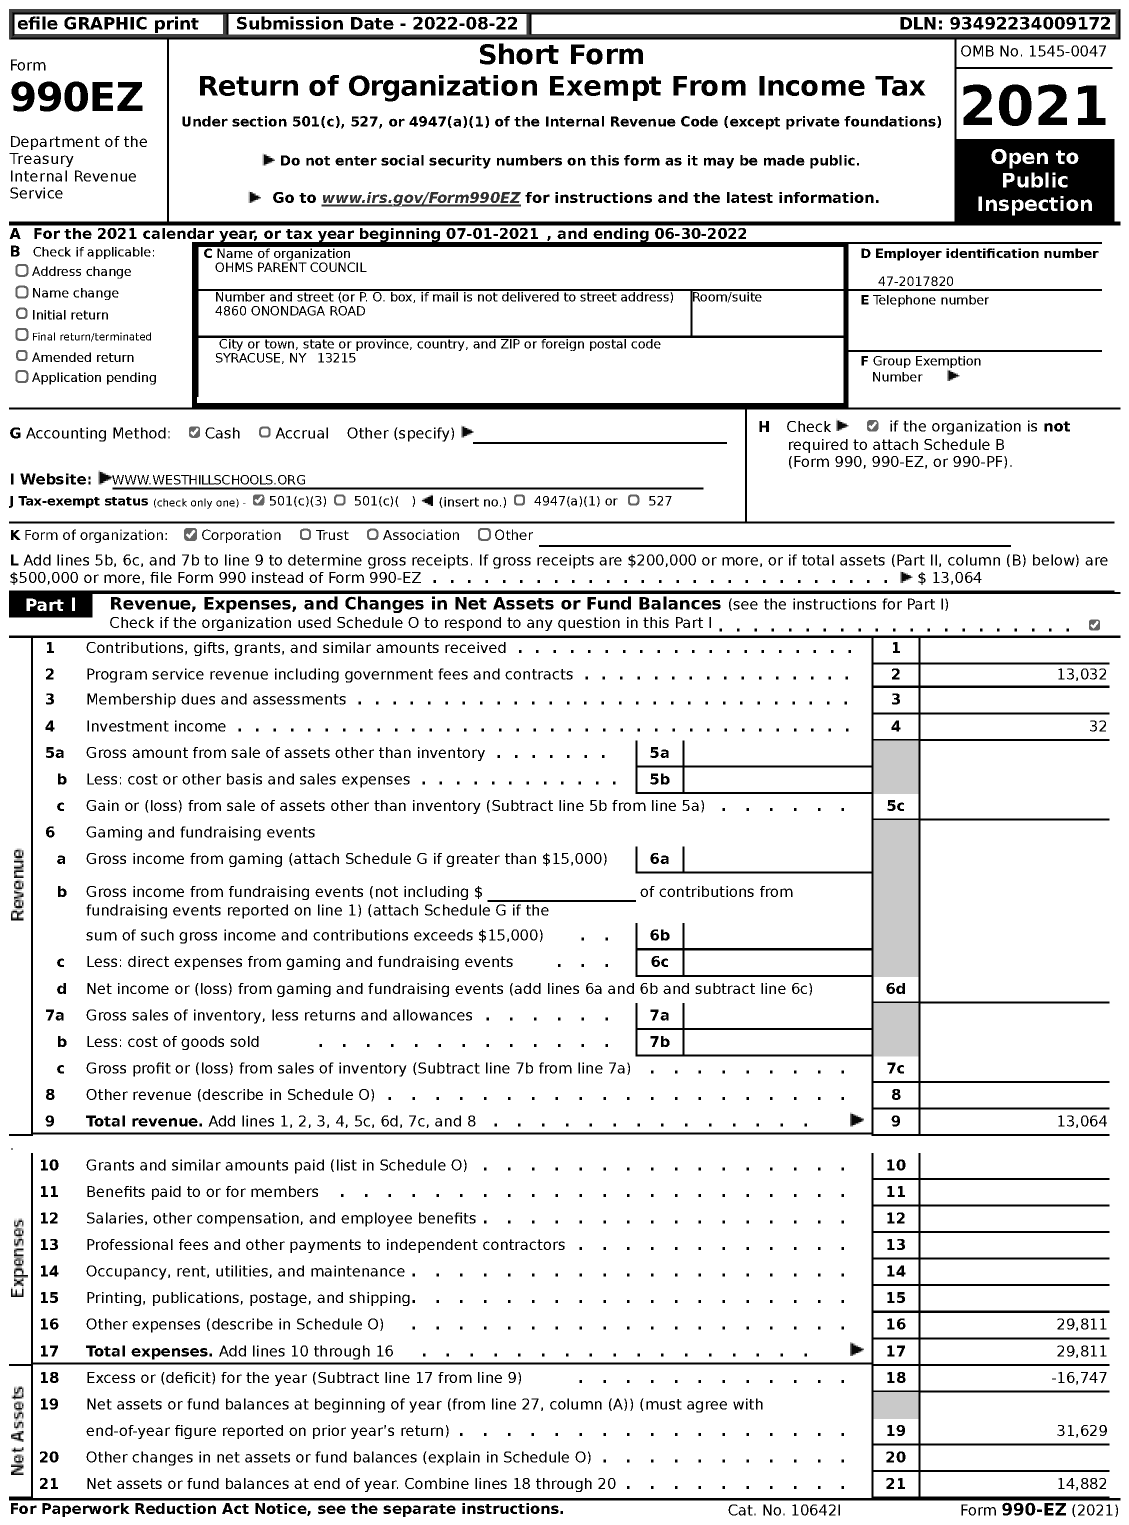 Image of first page of 2021 Form 990EZ for Ohms Parent Council